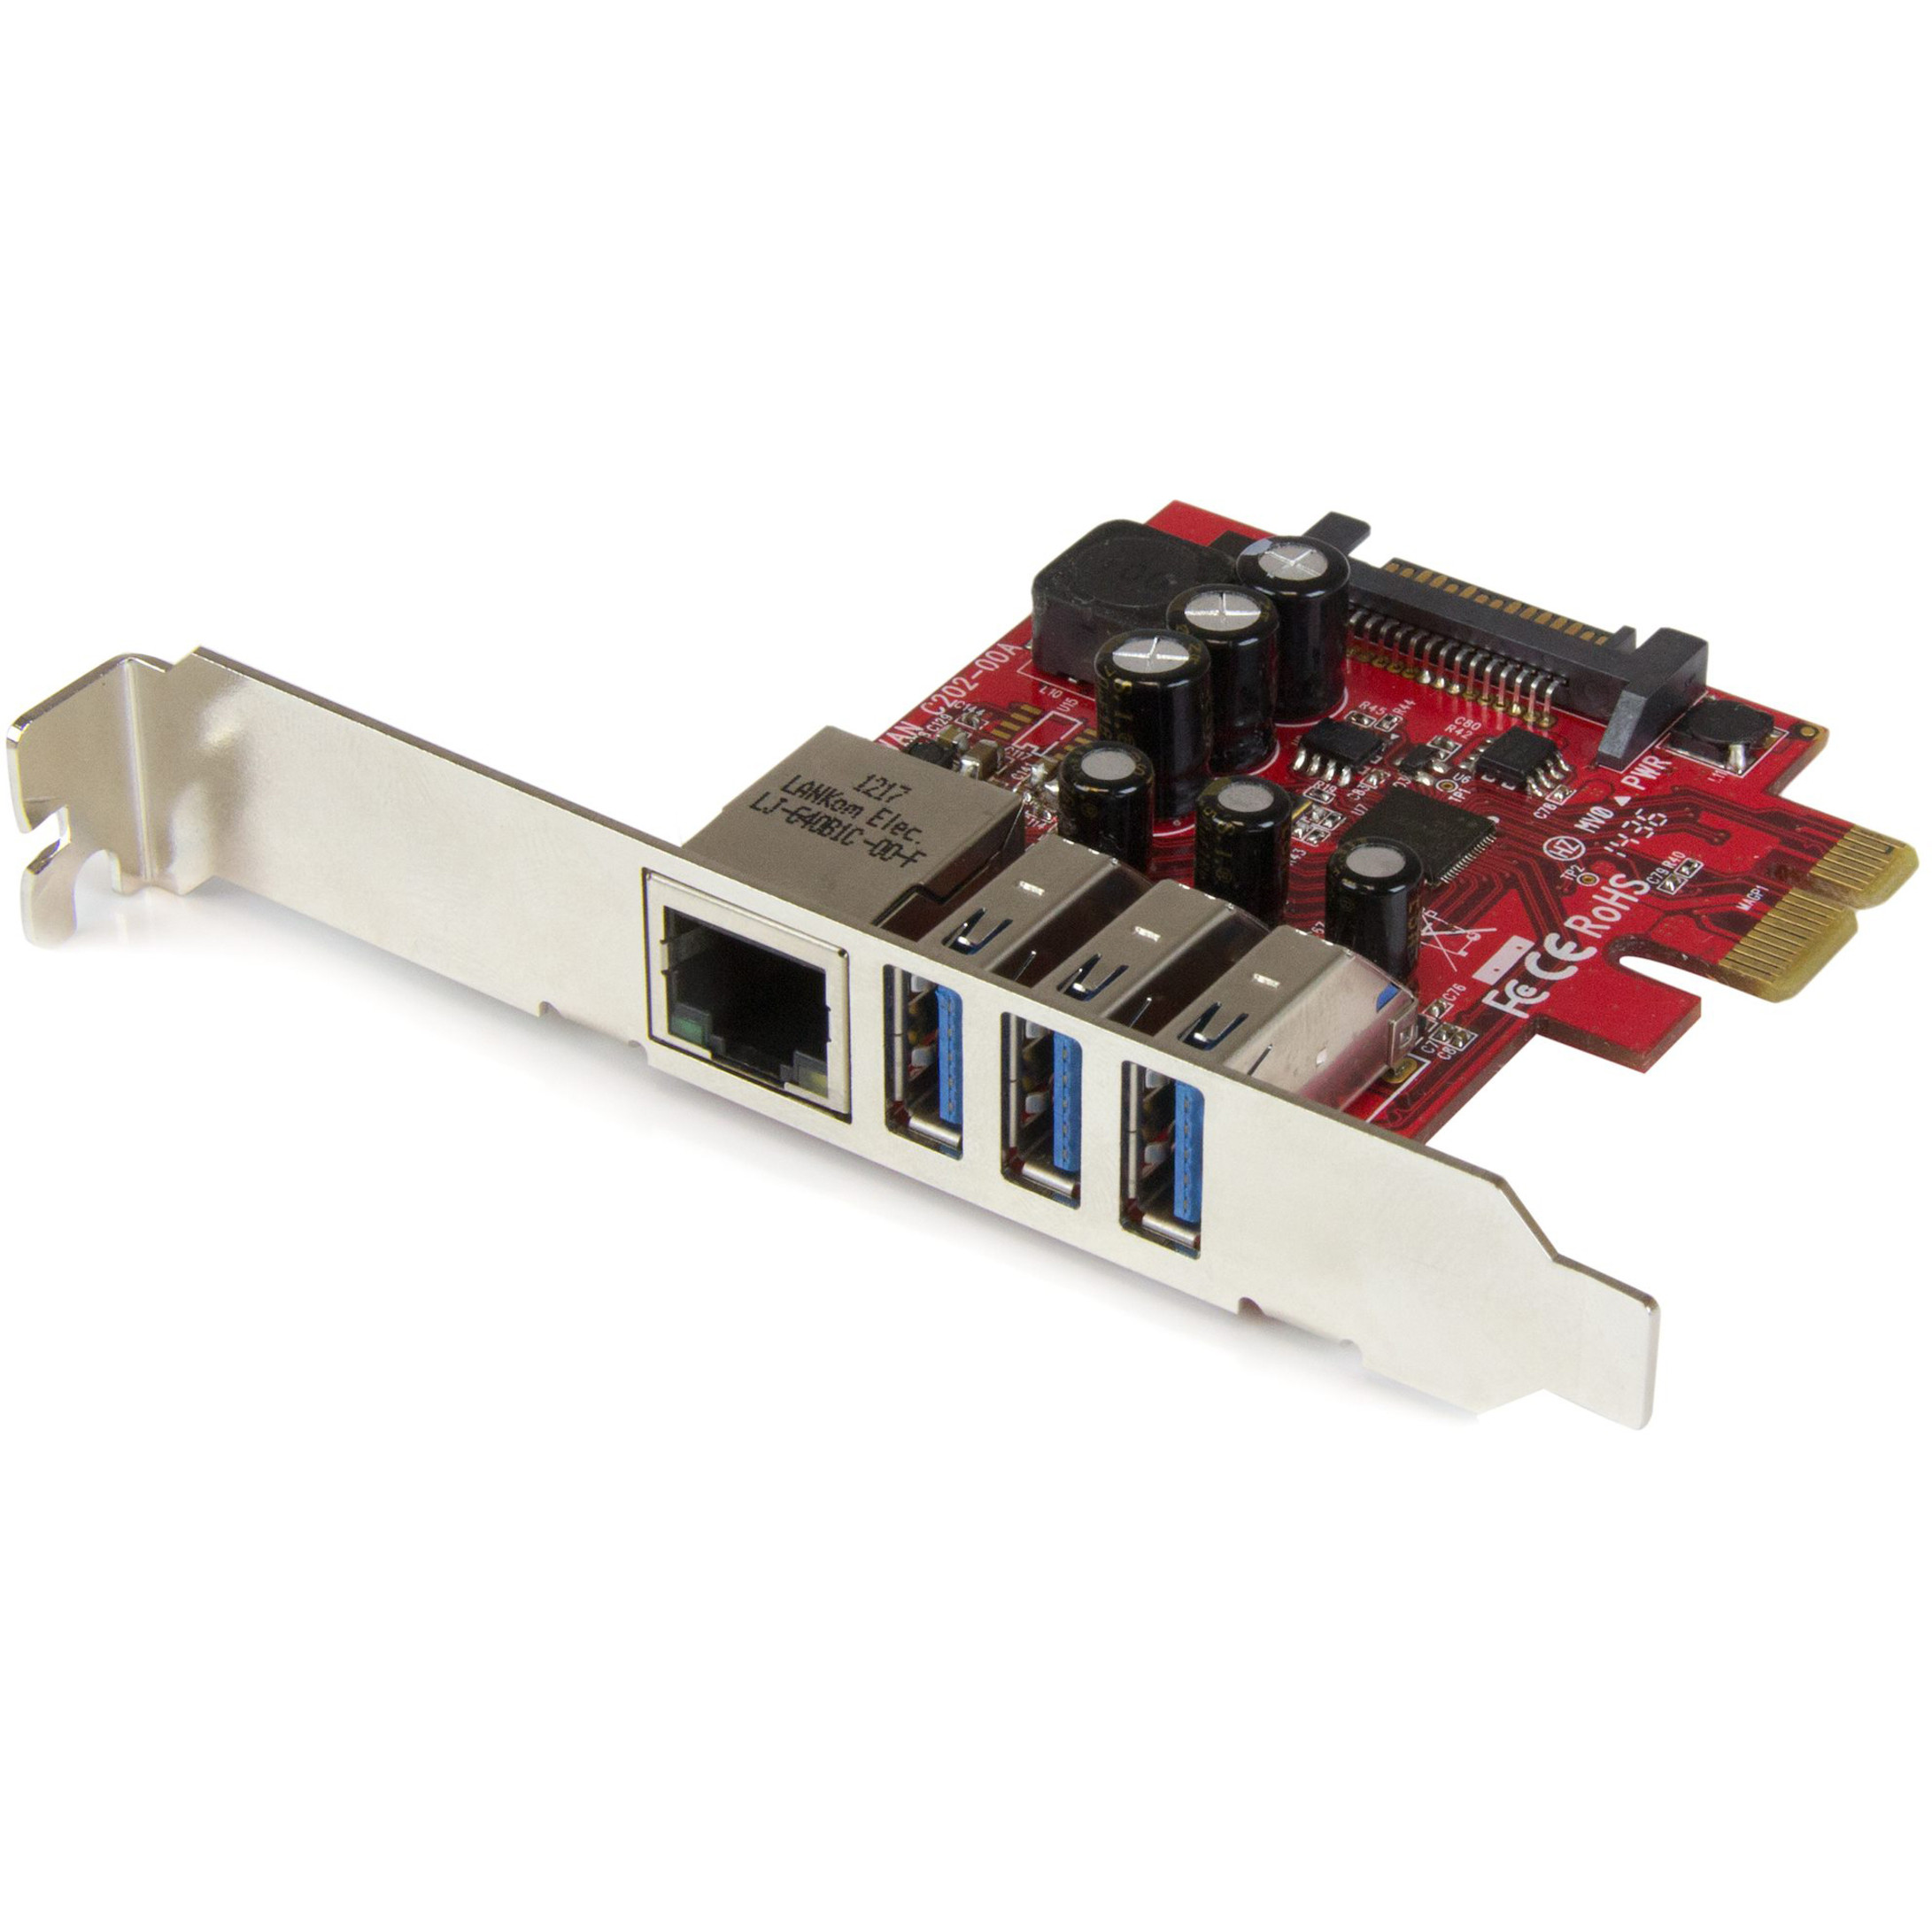 Startech .com 3 Port PCI Express USB 3.0 Card + Gigabit EthernetRunning low on expansion slots? Merge USB 3.0 and GbE into a single PCIe c… PEXUSB3S3GE